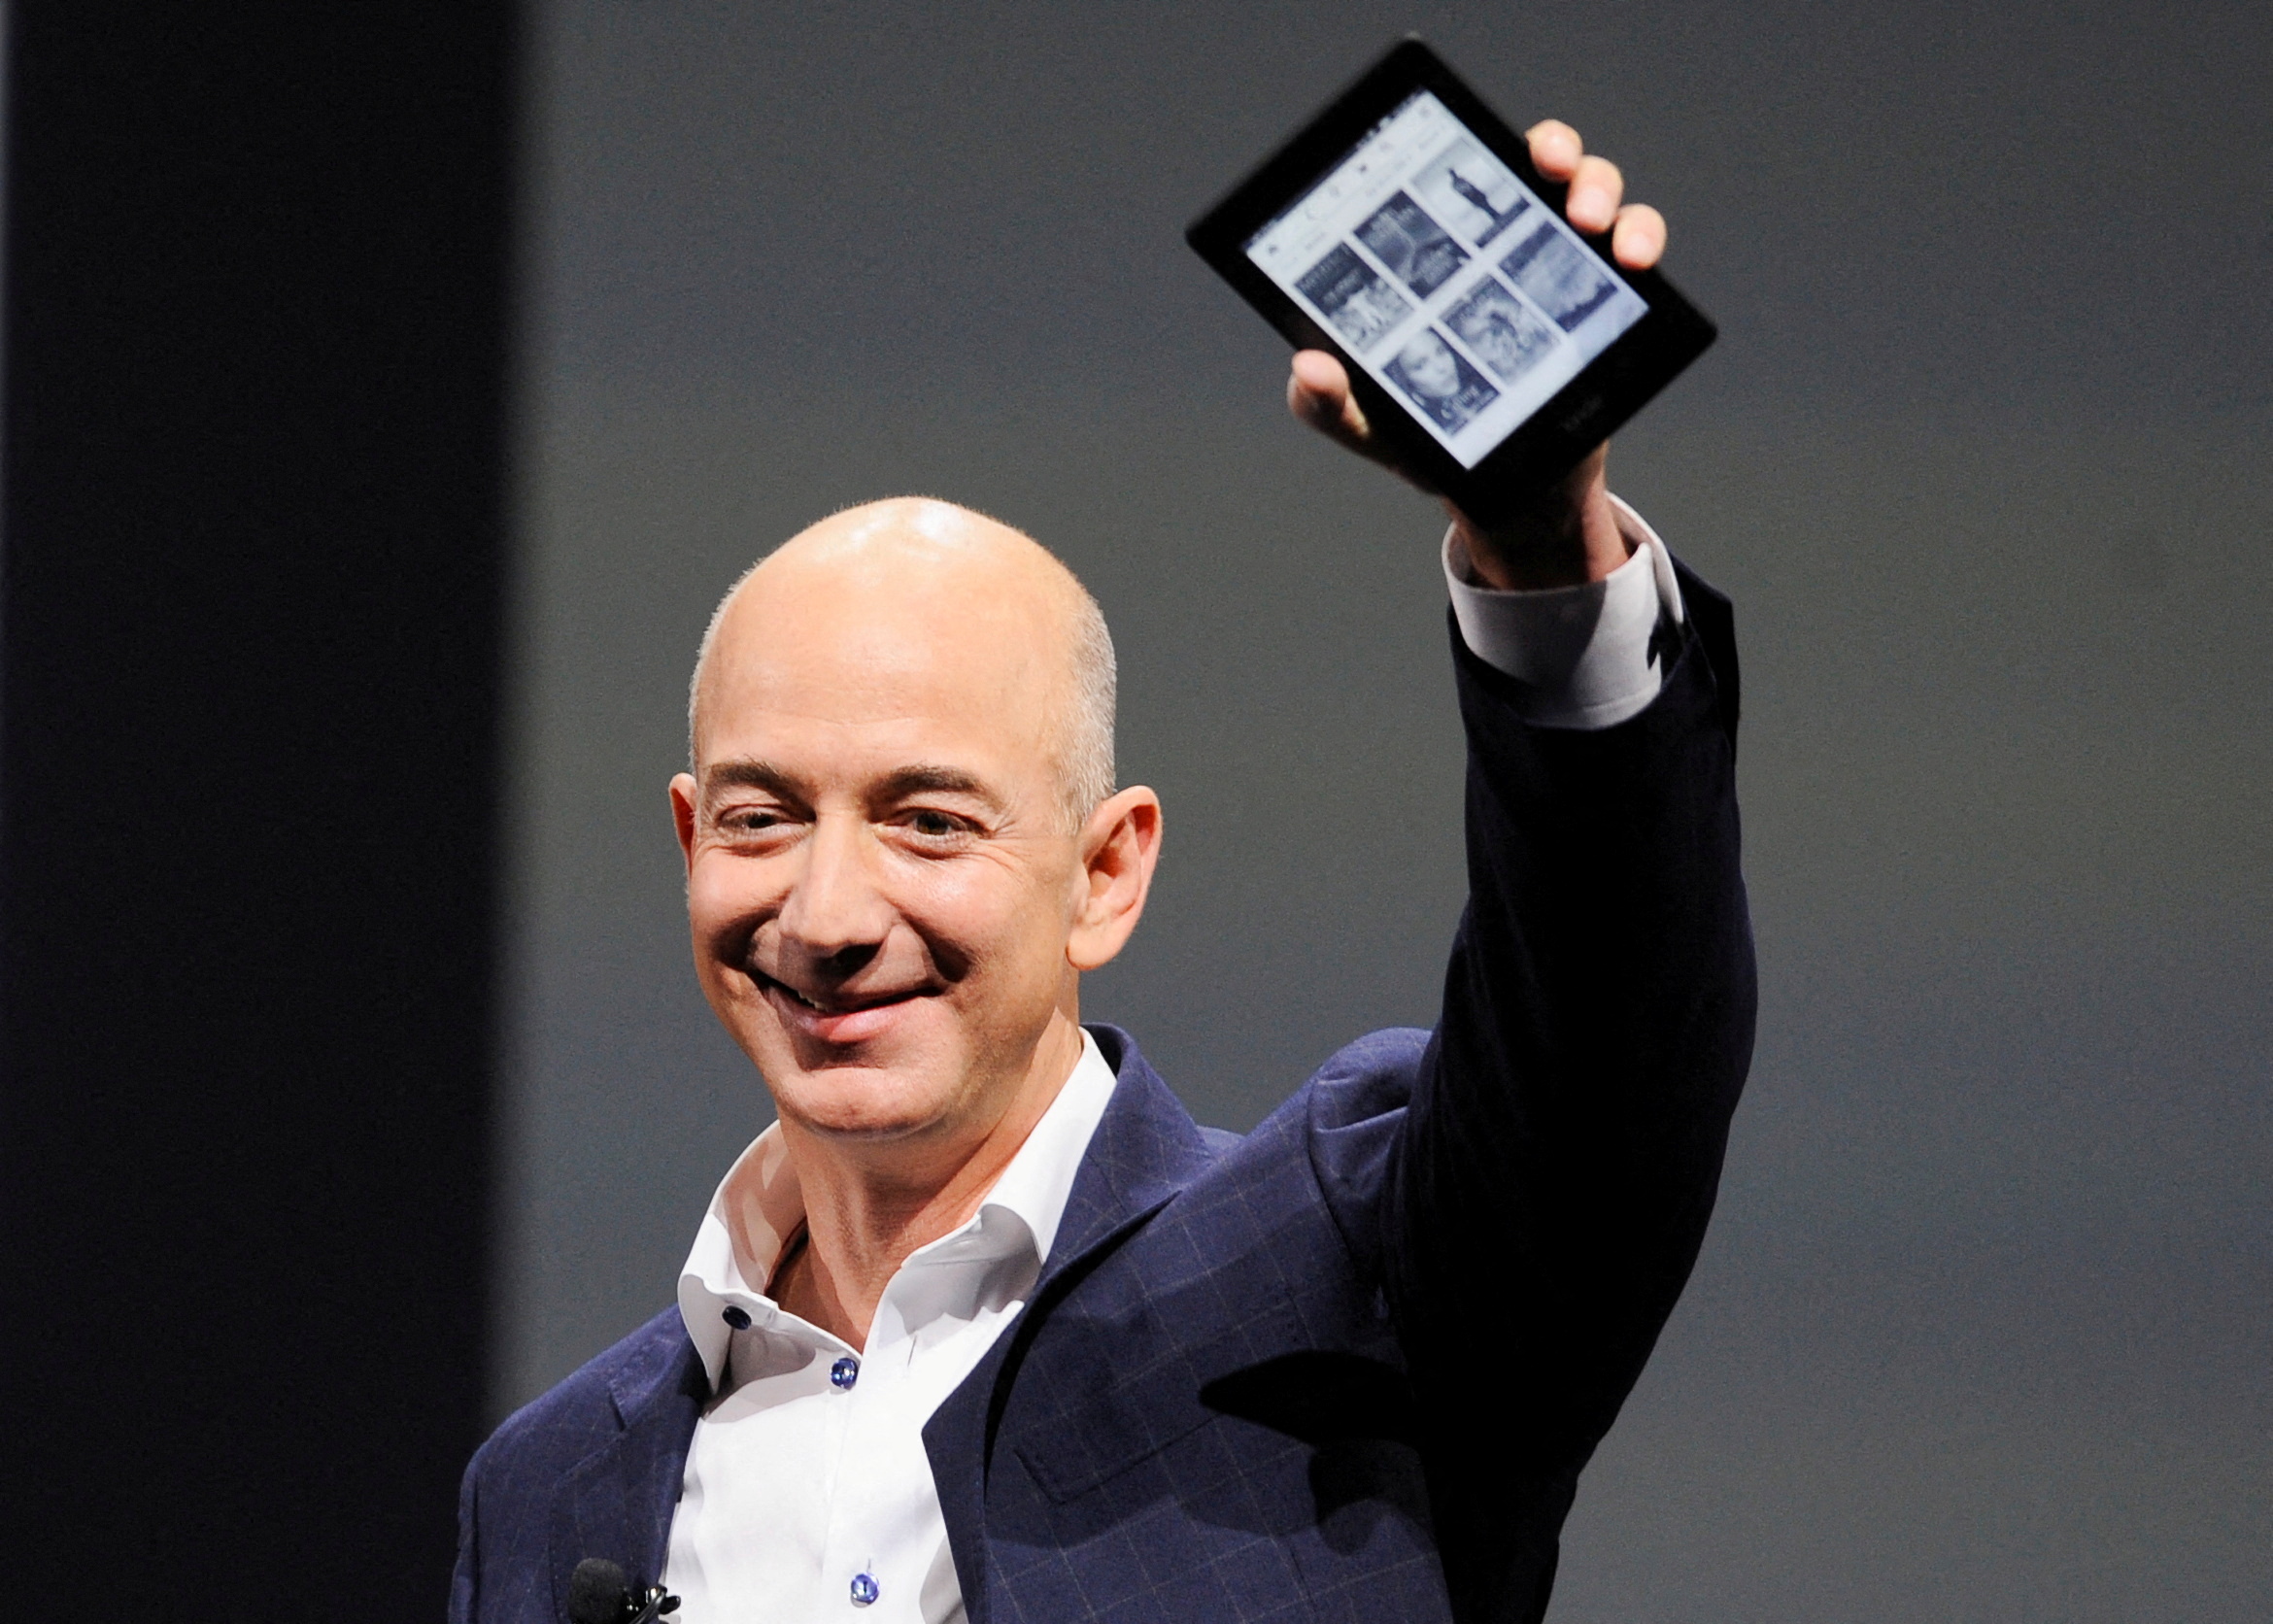 Amazon CEO Jeff Bezos holds up a Kindle Paperwhite during Amazon's Kindle Fire event in Santa Monica, California September 6, 2012.  REUTERS/Gus Ruelas/File Photo